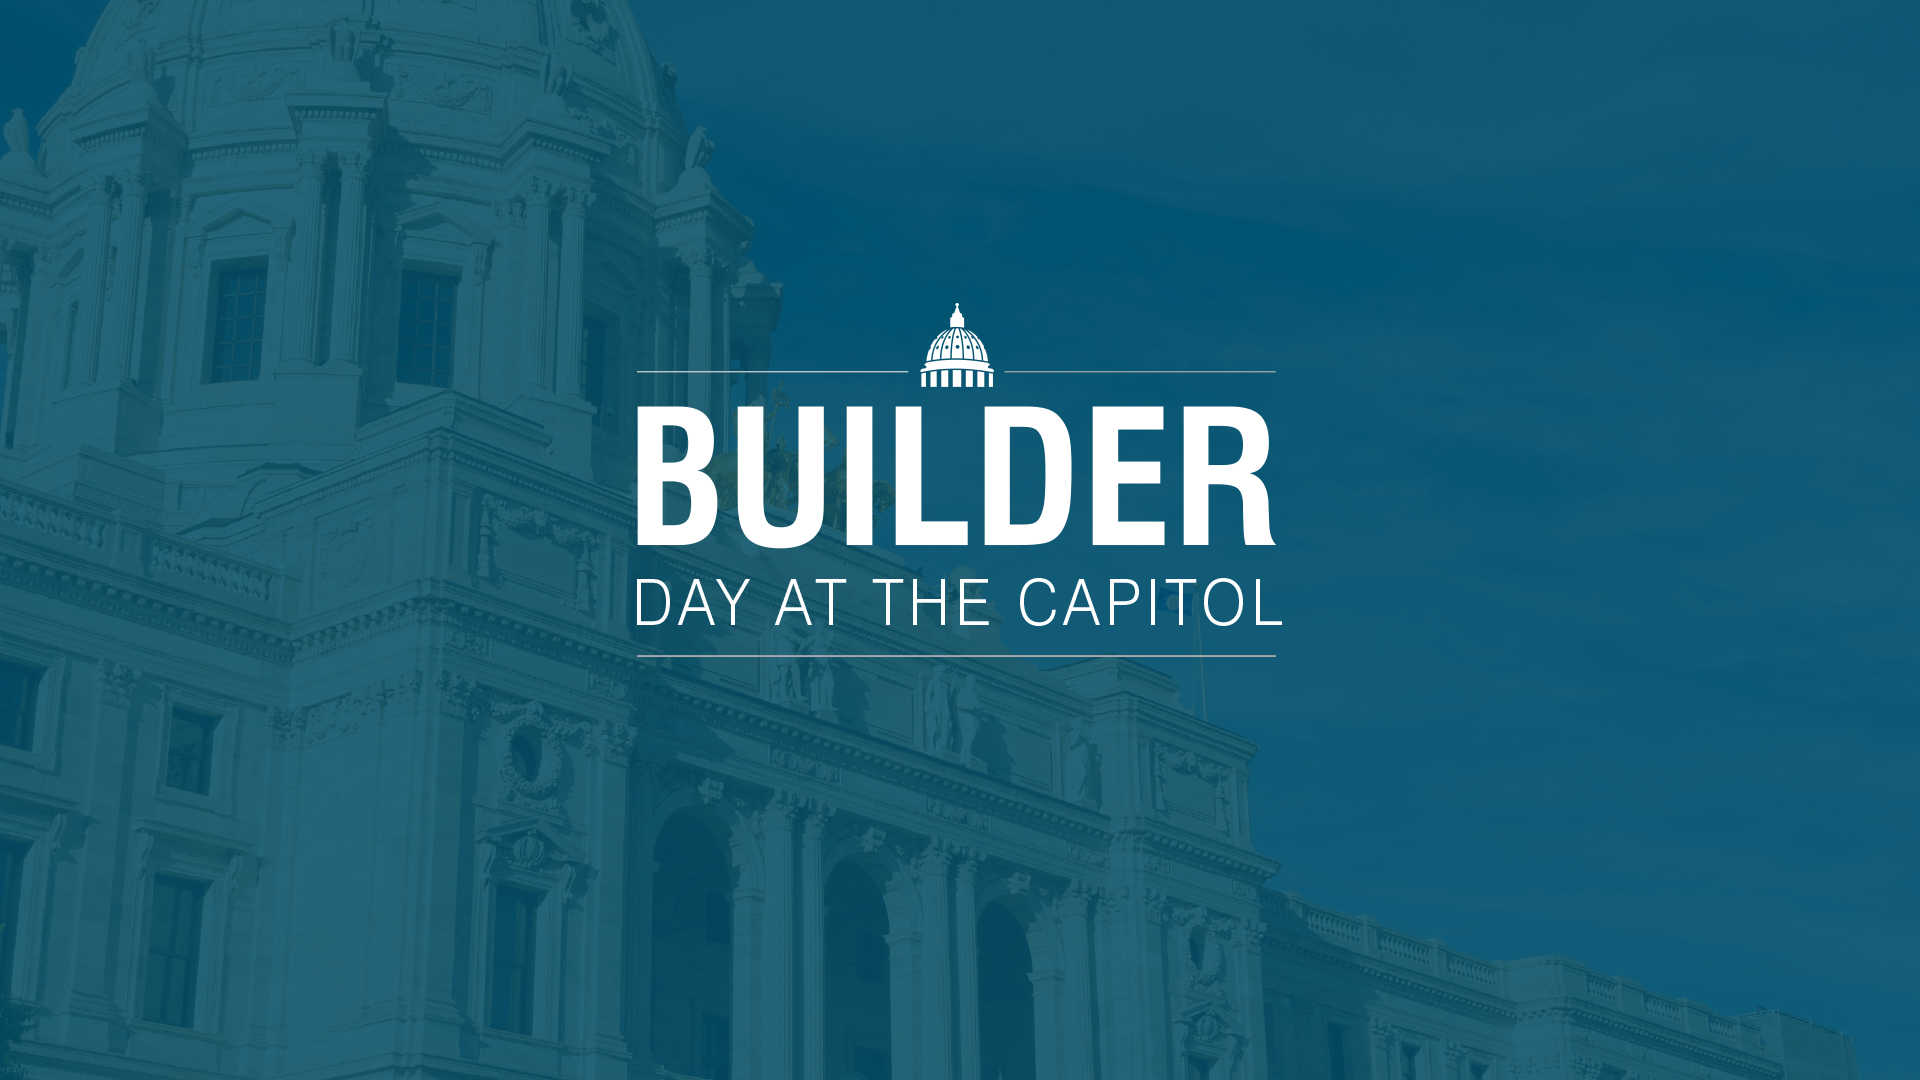 Image for Over 250 Expected at Home Building Industry Day at the Capitol